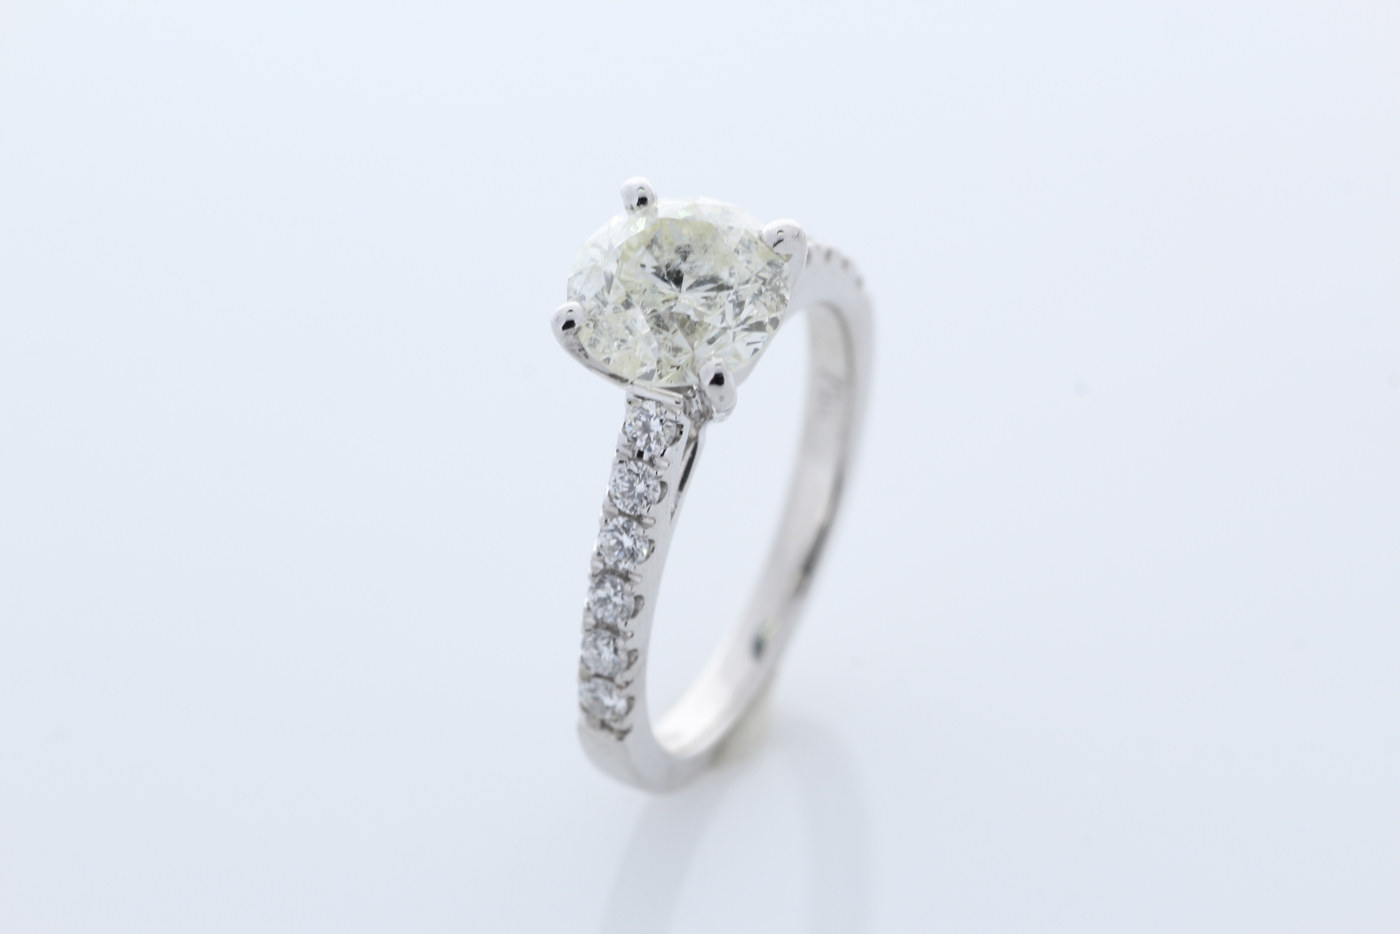 18ct White Gold Stone Set Shoulders Diamond Ring 1.92 Carats - Image 5 of 6